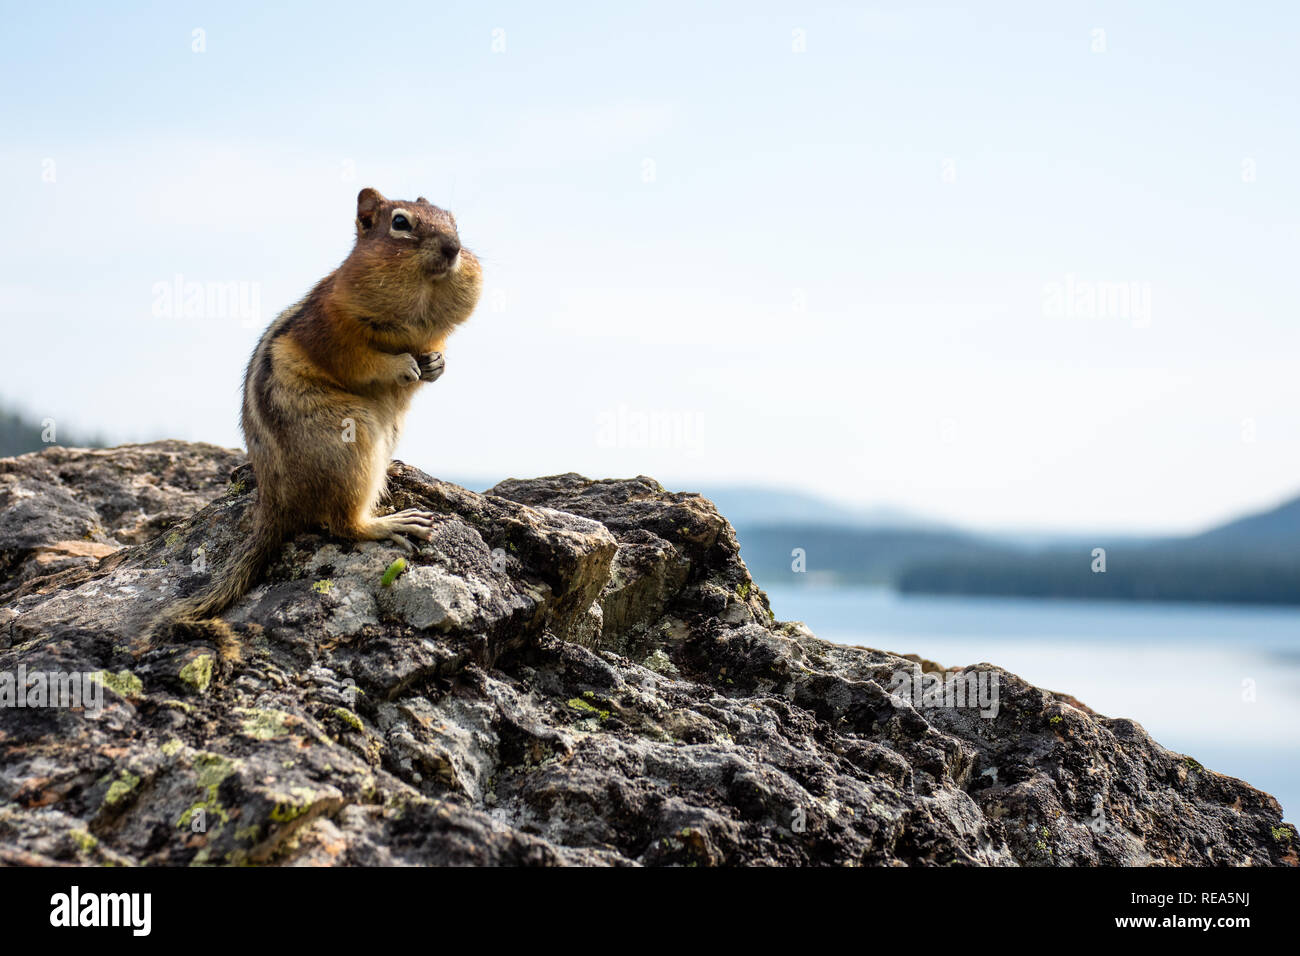 A Yellow Pine Chipmunk (Neotamias amoenus) stands on a rocky outcrop in Glacier National Park, Montana. Stock Photo